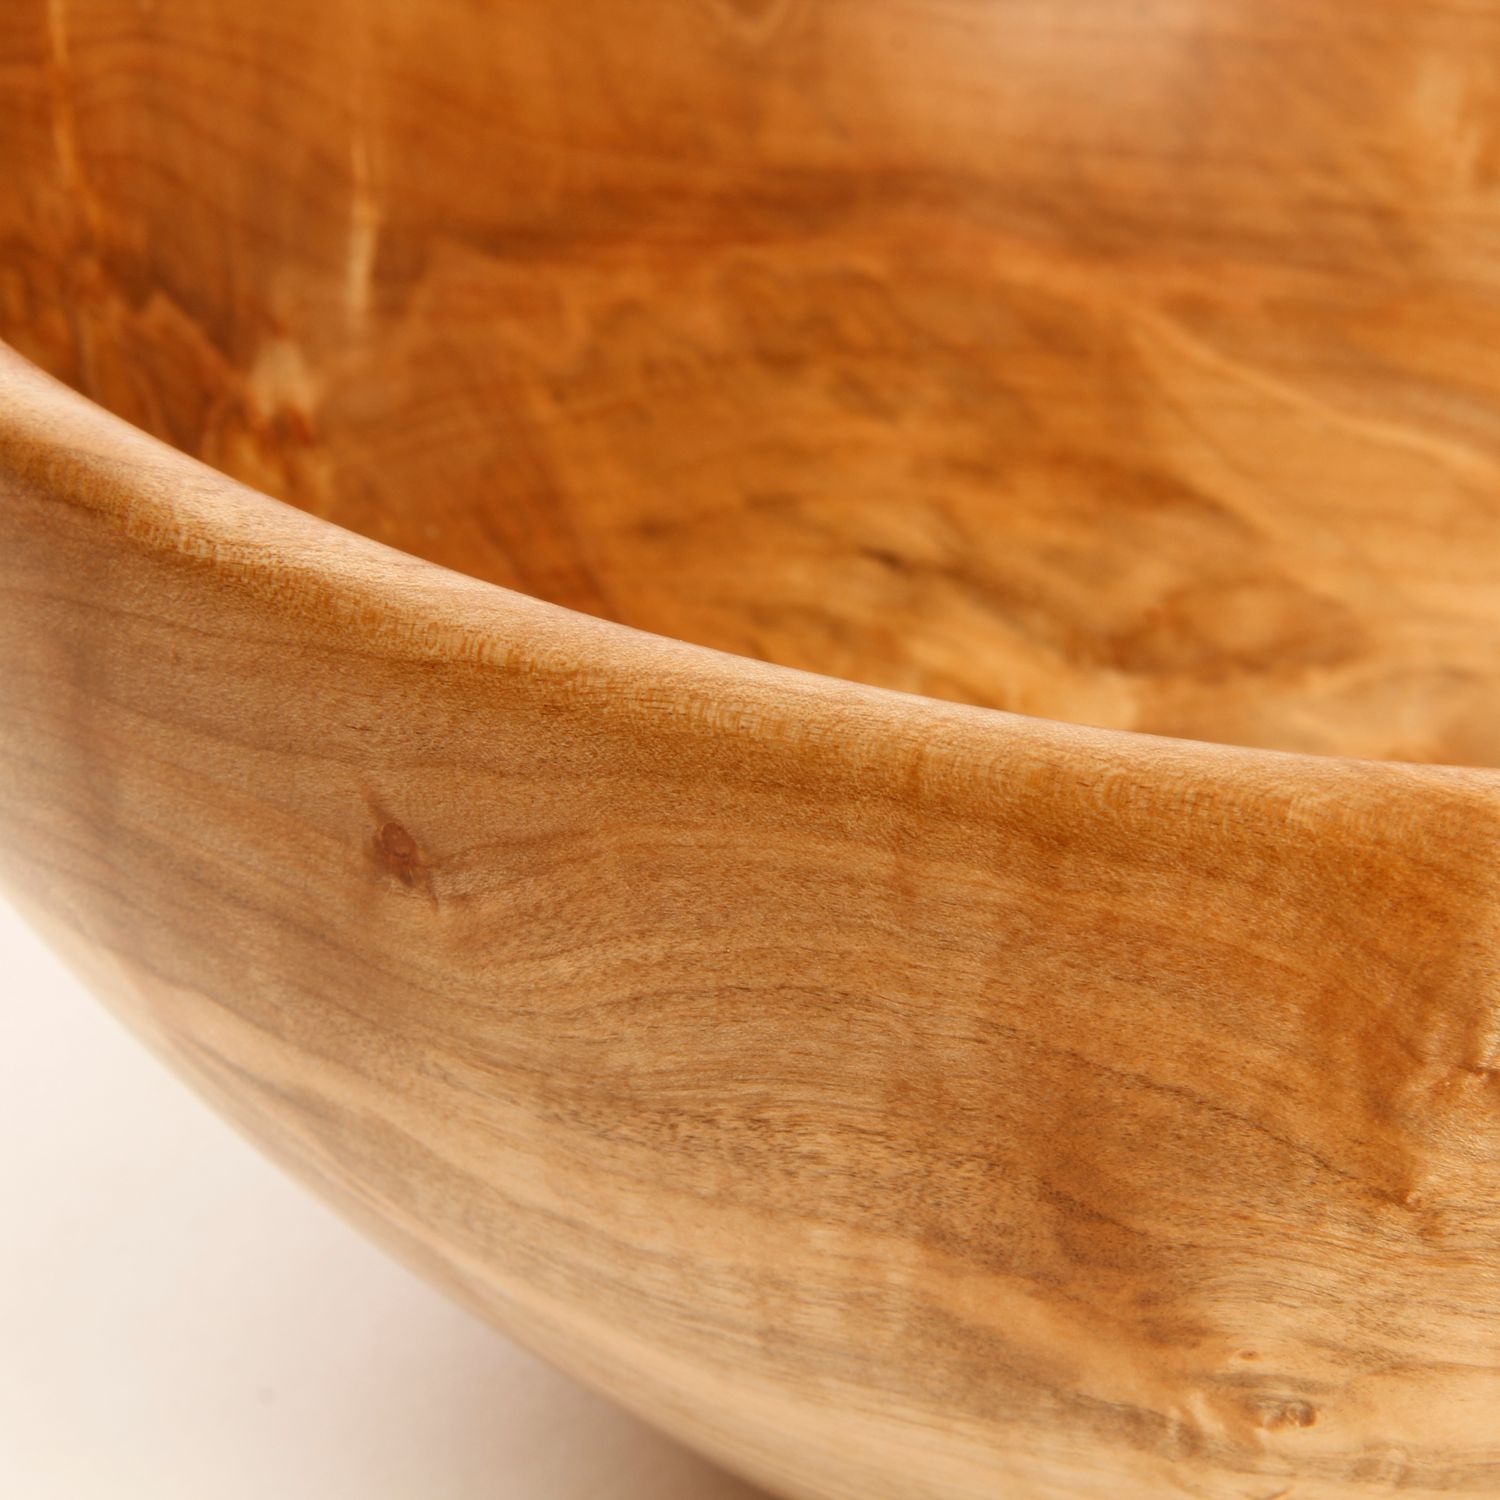 Michael Sbrocca: Large Maple Bowl Product Image 2 of 4